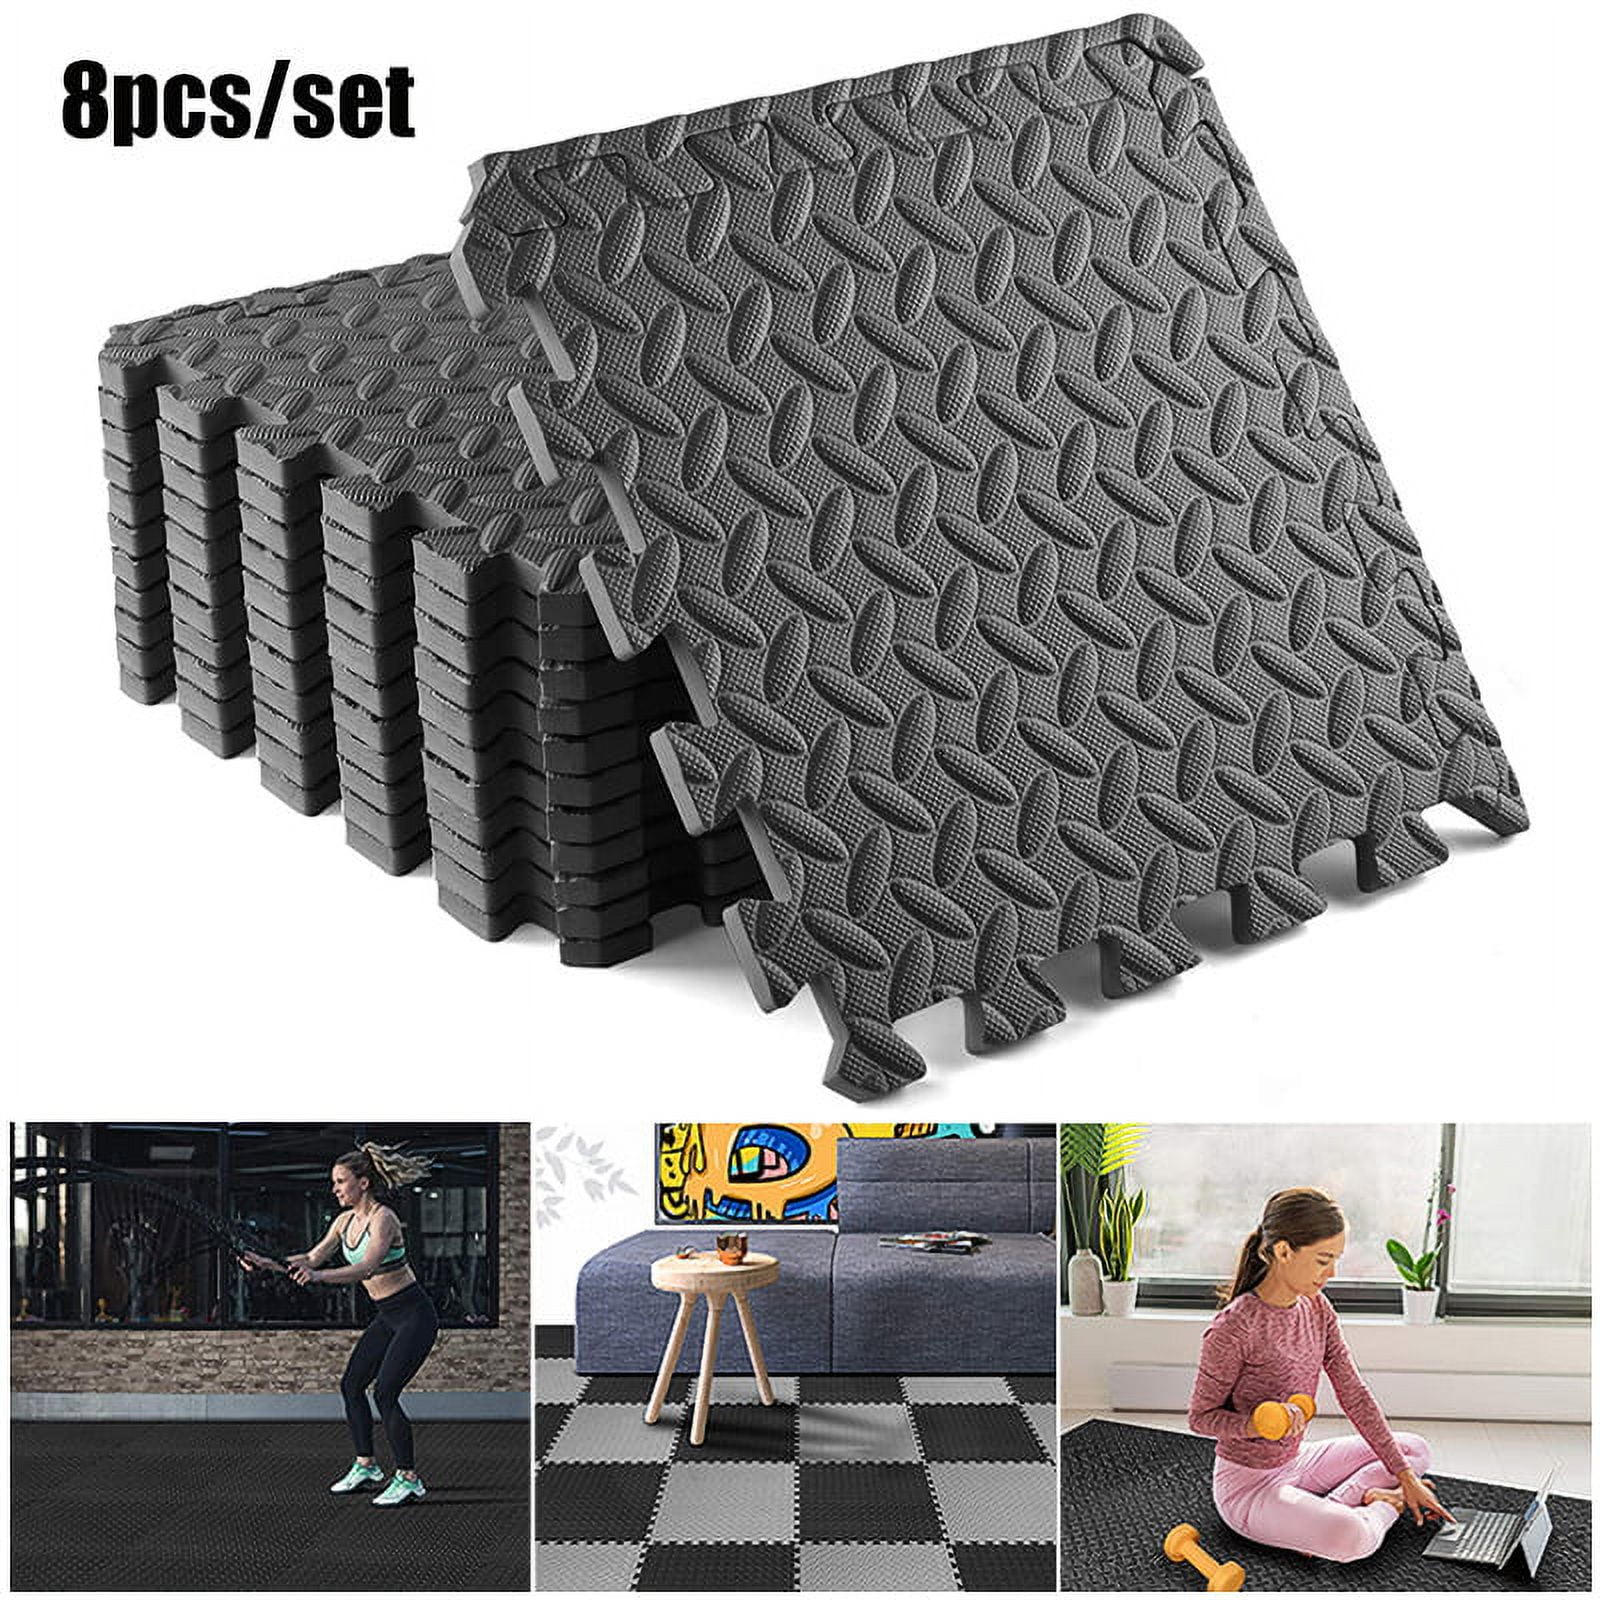 Foam Floor Mats - Interlocking EVA Foam Padding for Home Gym - Non-Toxic  8-Piece Play Mat Set for Toddlers, Babies, and Kids by Stalwart (Multicolor)